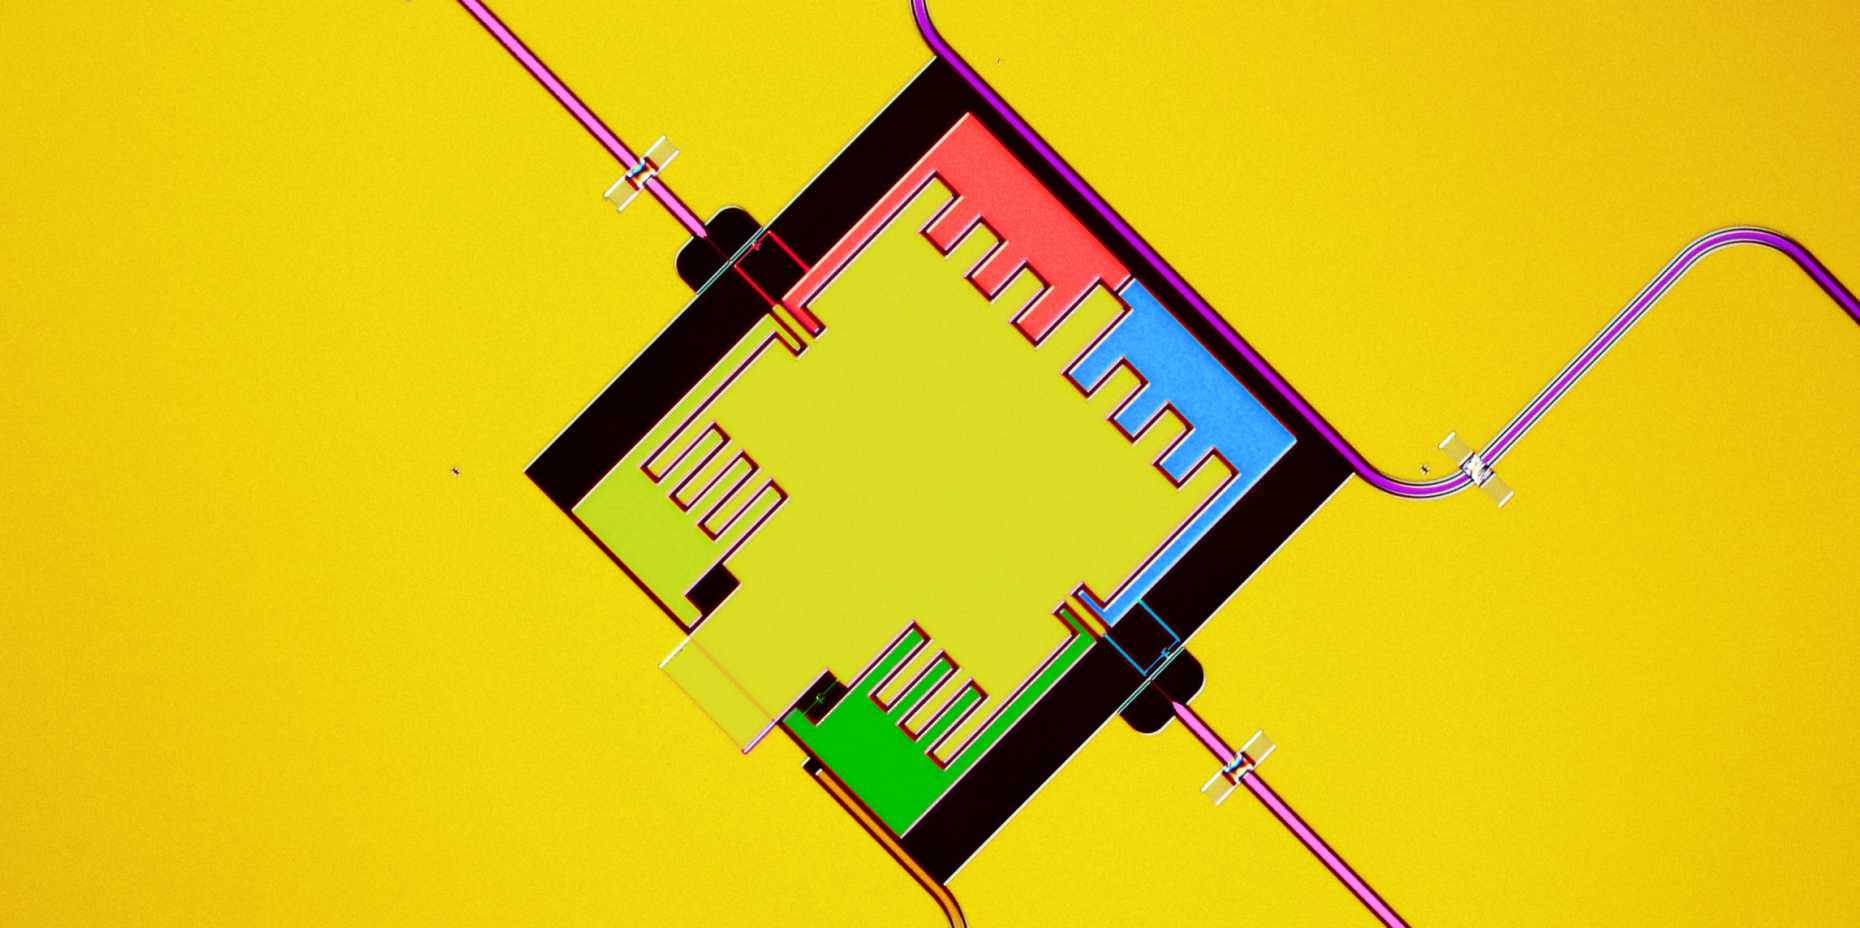 Enlarged view: Image of a three-qubit circuit built for simulating light-harvesting models. Three qubits (in red, blue and green) harvest microwave radiation from the purple waveguide. With the help of specifically engineered classical noise, applied through pink flux-lines, the qubits channel the harvested energy to the output resonator shown in orange. (Picture: ETH Zurich, Quantum Device Lab, A. Potočnik)